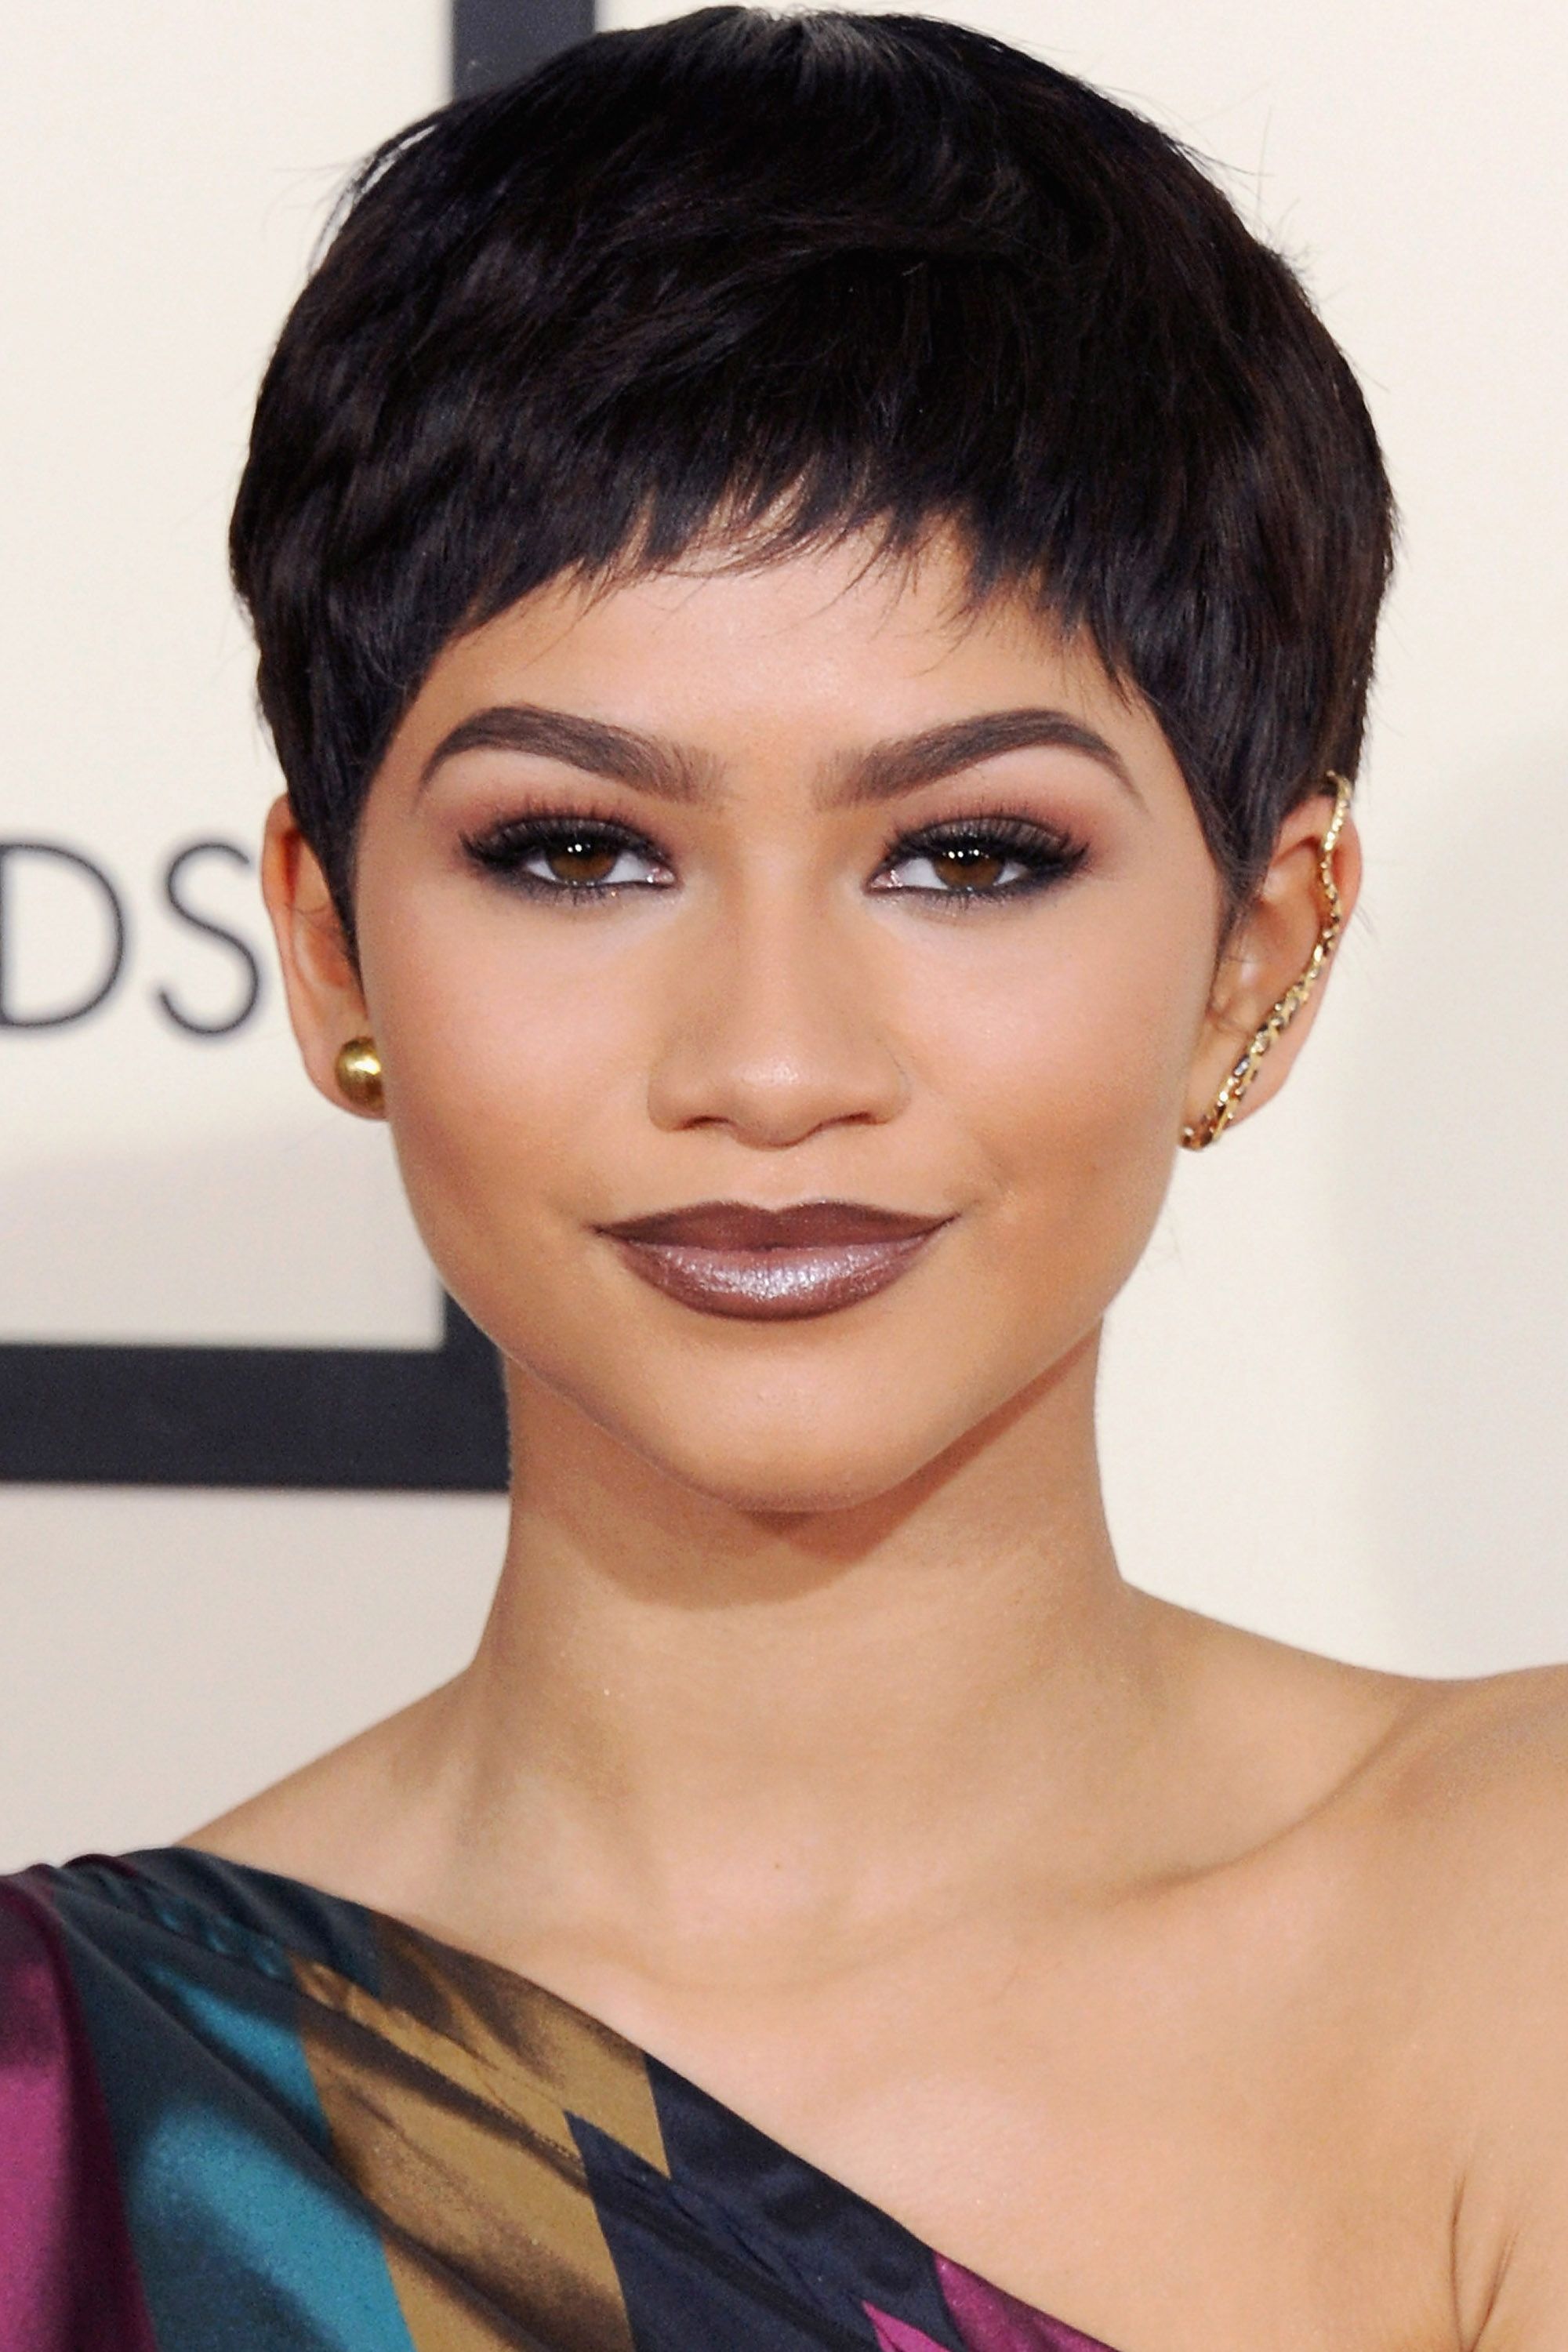 50 Pixie Cuts We Love For 2018 Short Pixie Hairstyles From